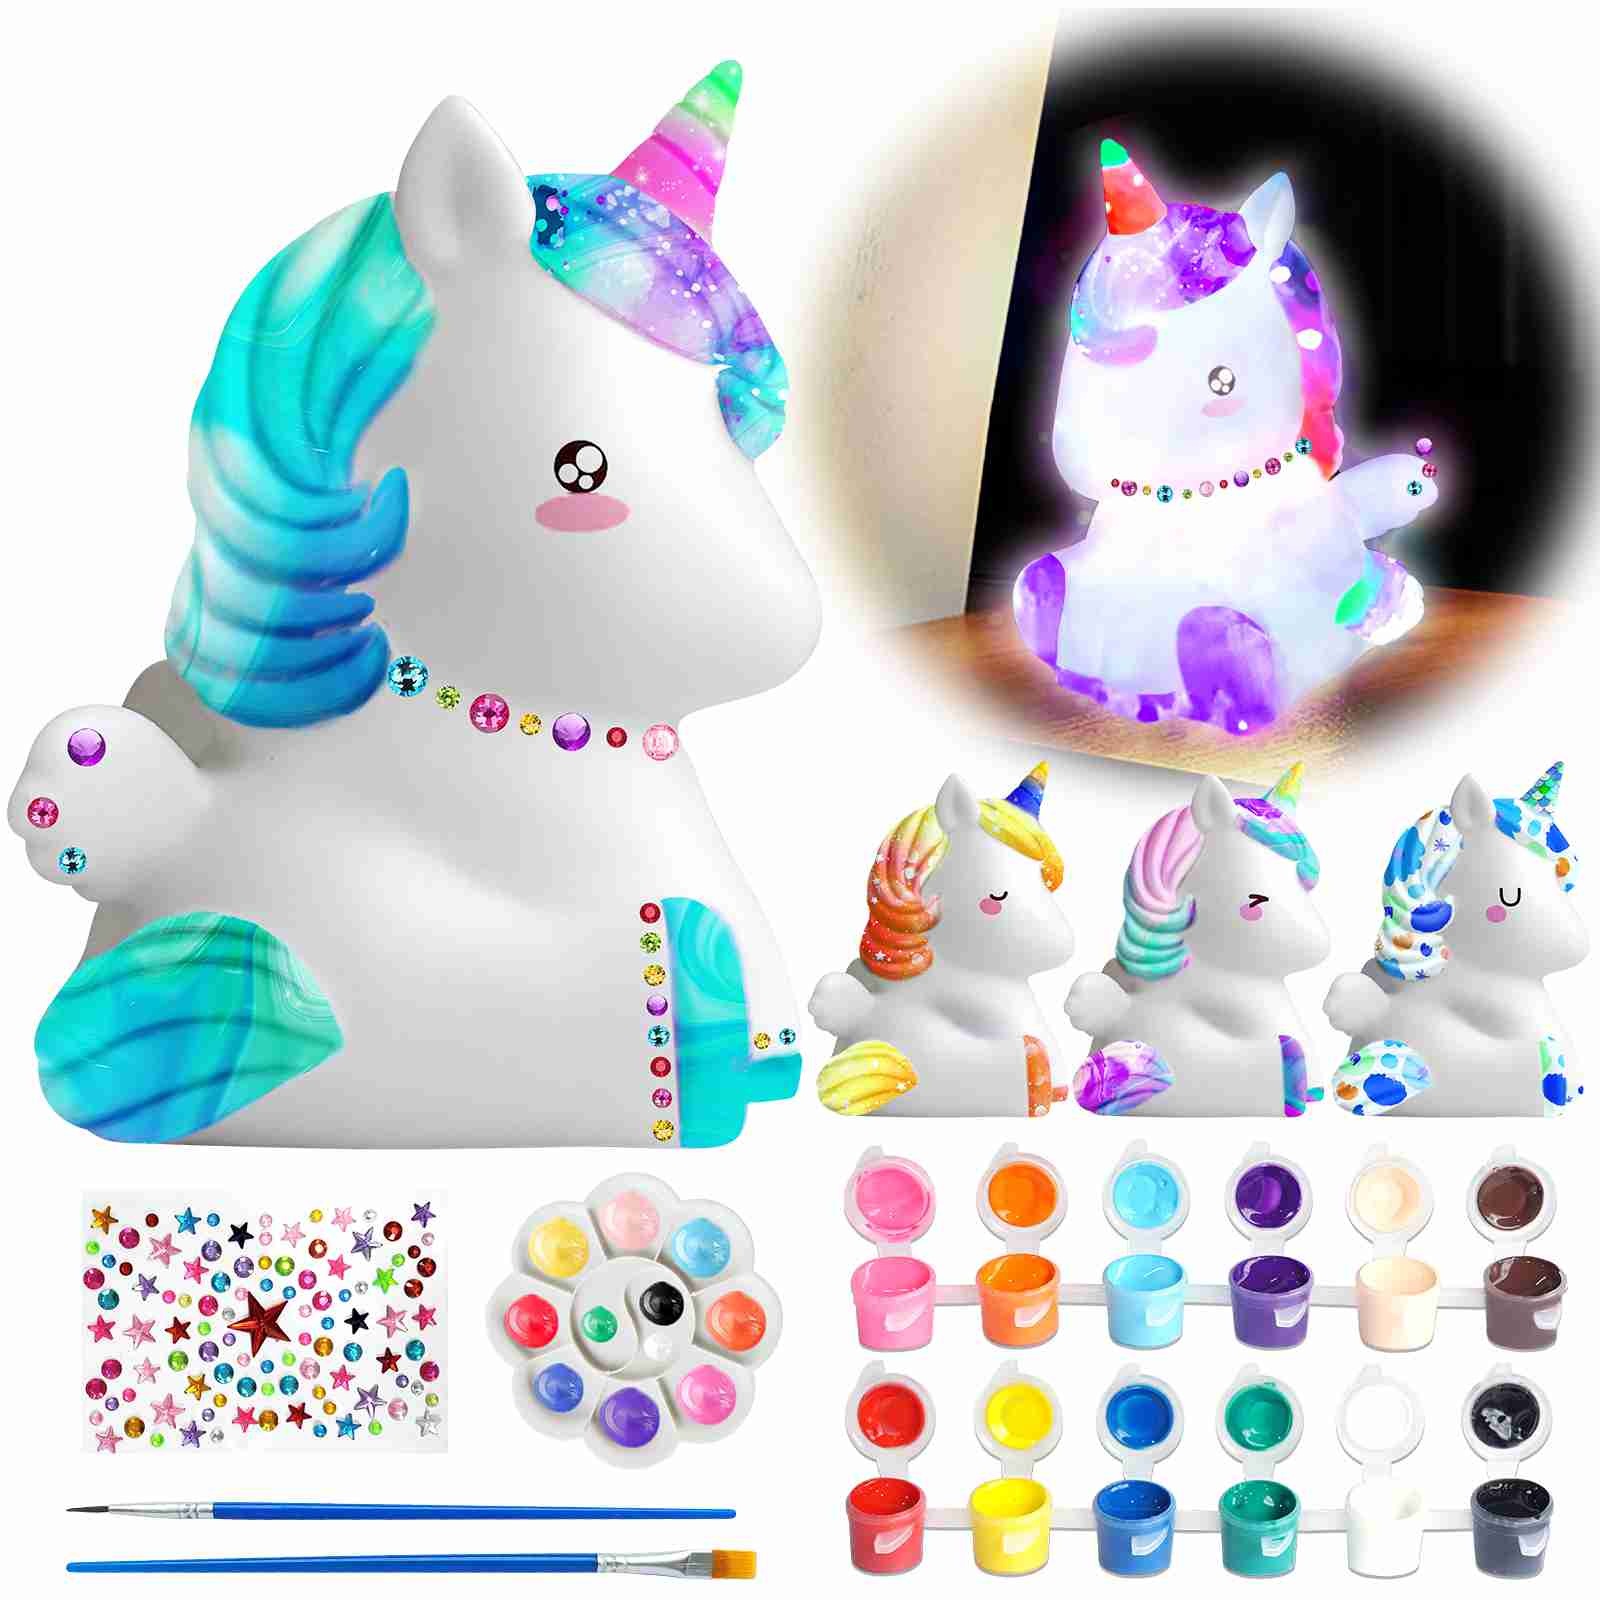 unicorn-toys-for-girls-crafts-for-kids-unicorn-night-light with cash back rebate